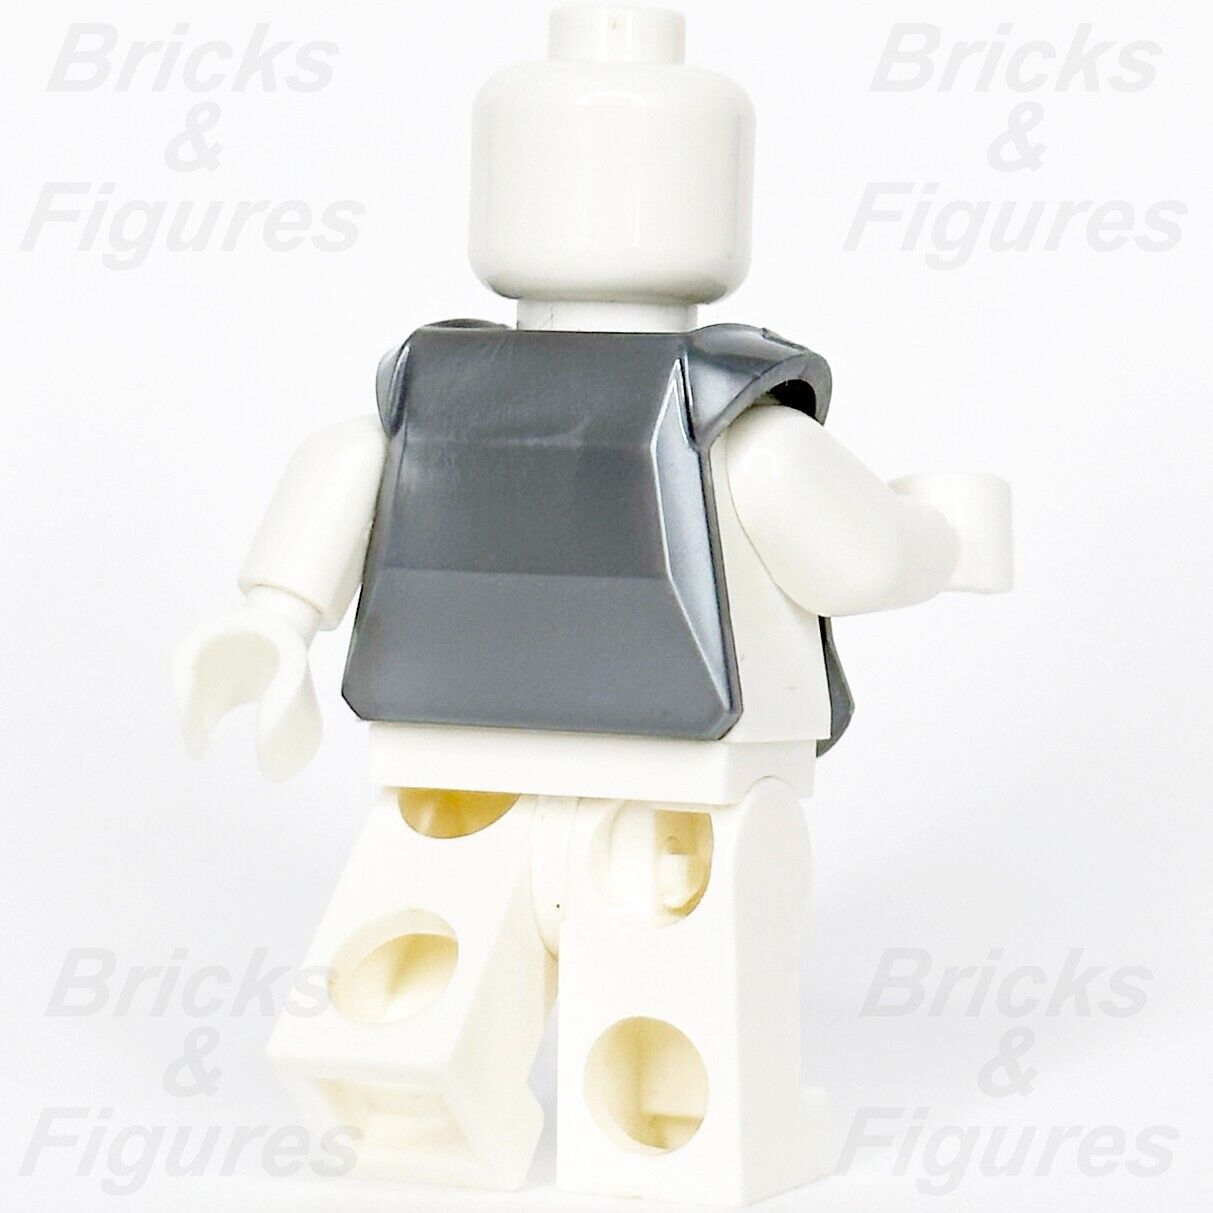 LEGO Knight of the Yellow Castle Breastplate Armour Minifigure Part 2587pb36 4